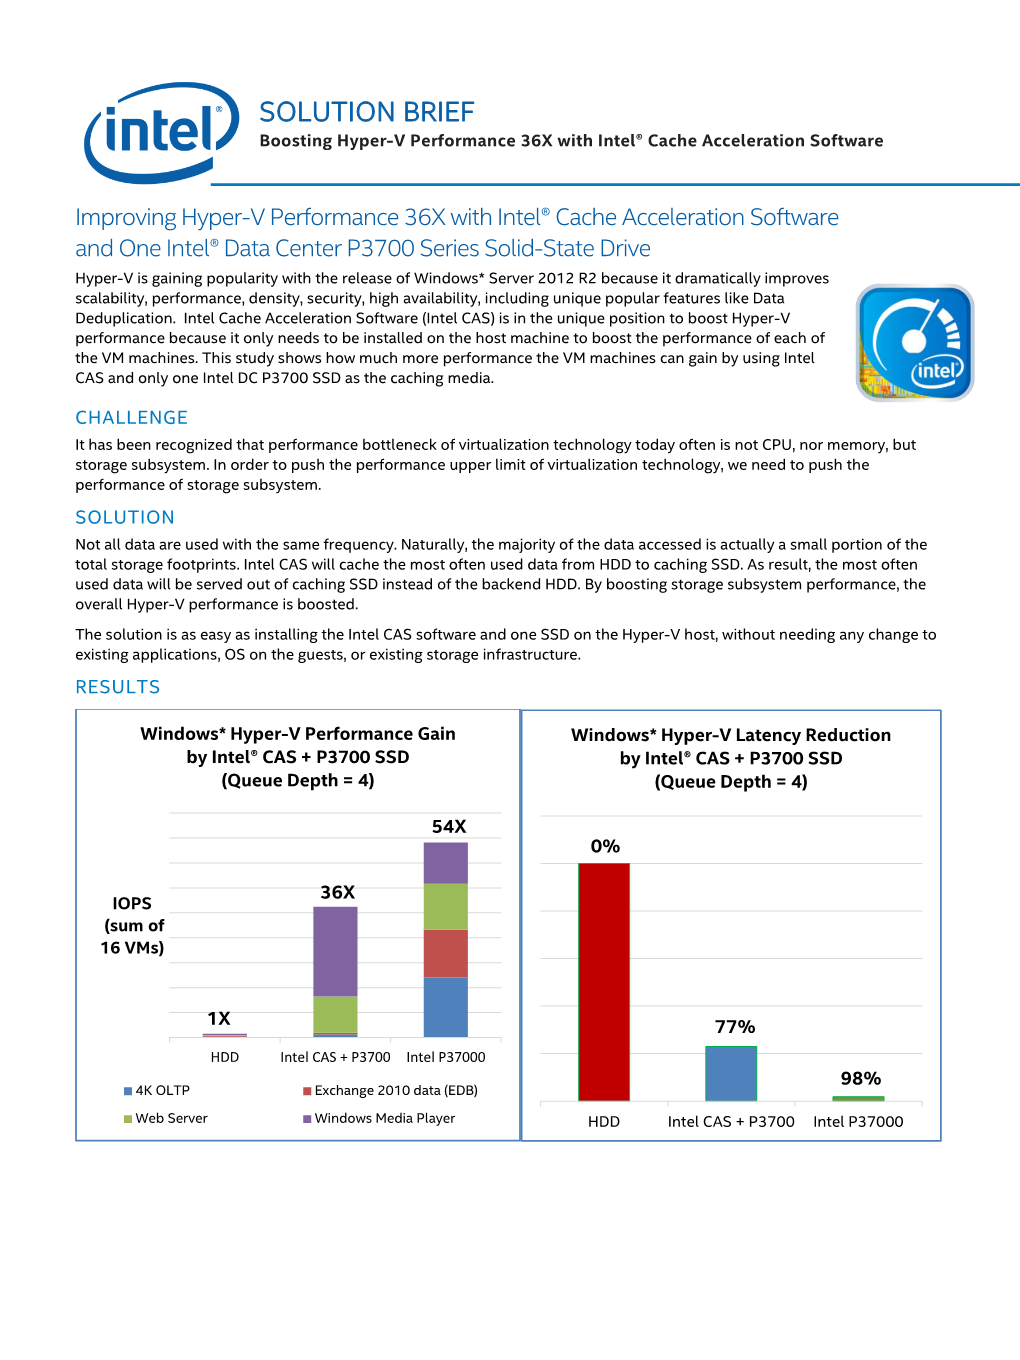 SOLUTION BRIEF : Boosting Hyper-V* Performance 36X with Intel® Cache Acceleration Software